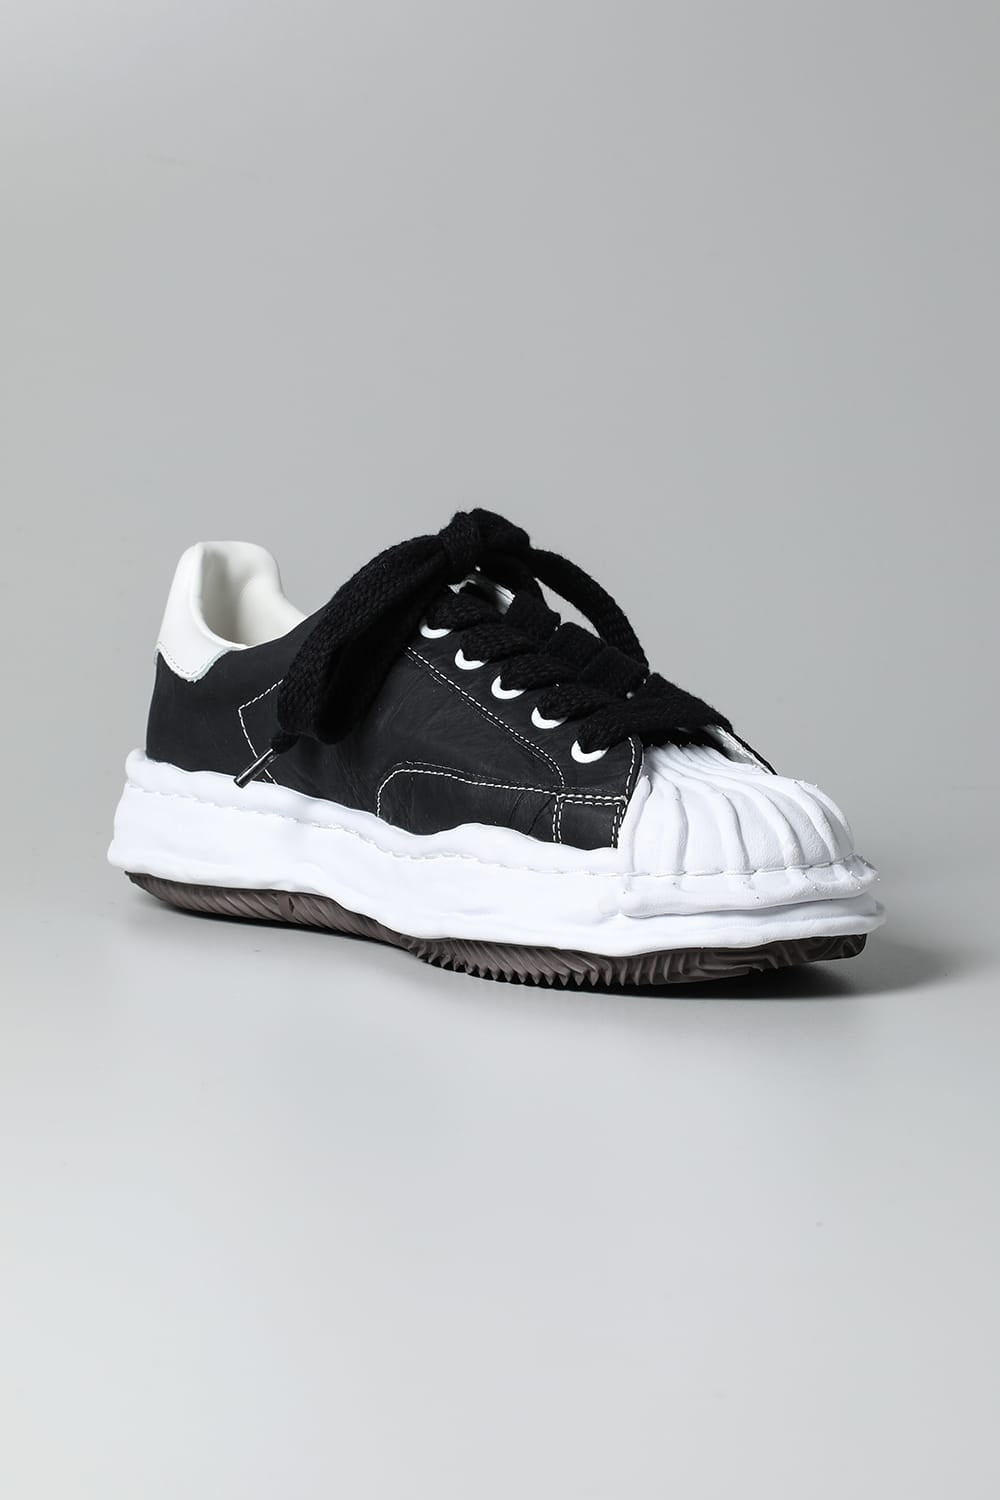 -BLAKEY Low- Original STC sole paper like leather Low-Top sneakers Black